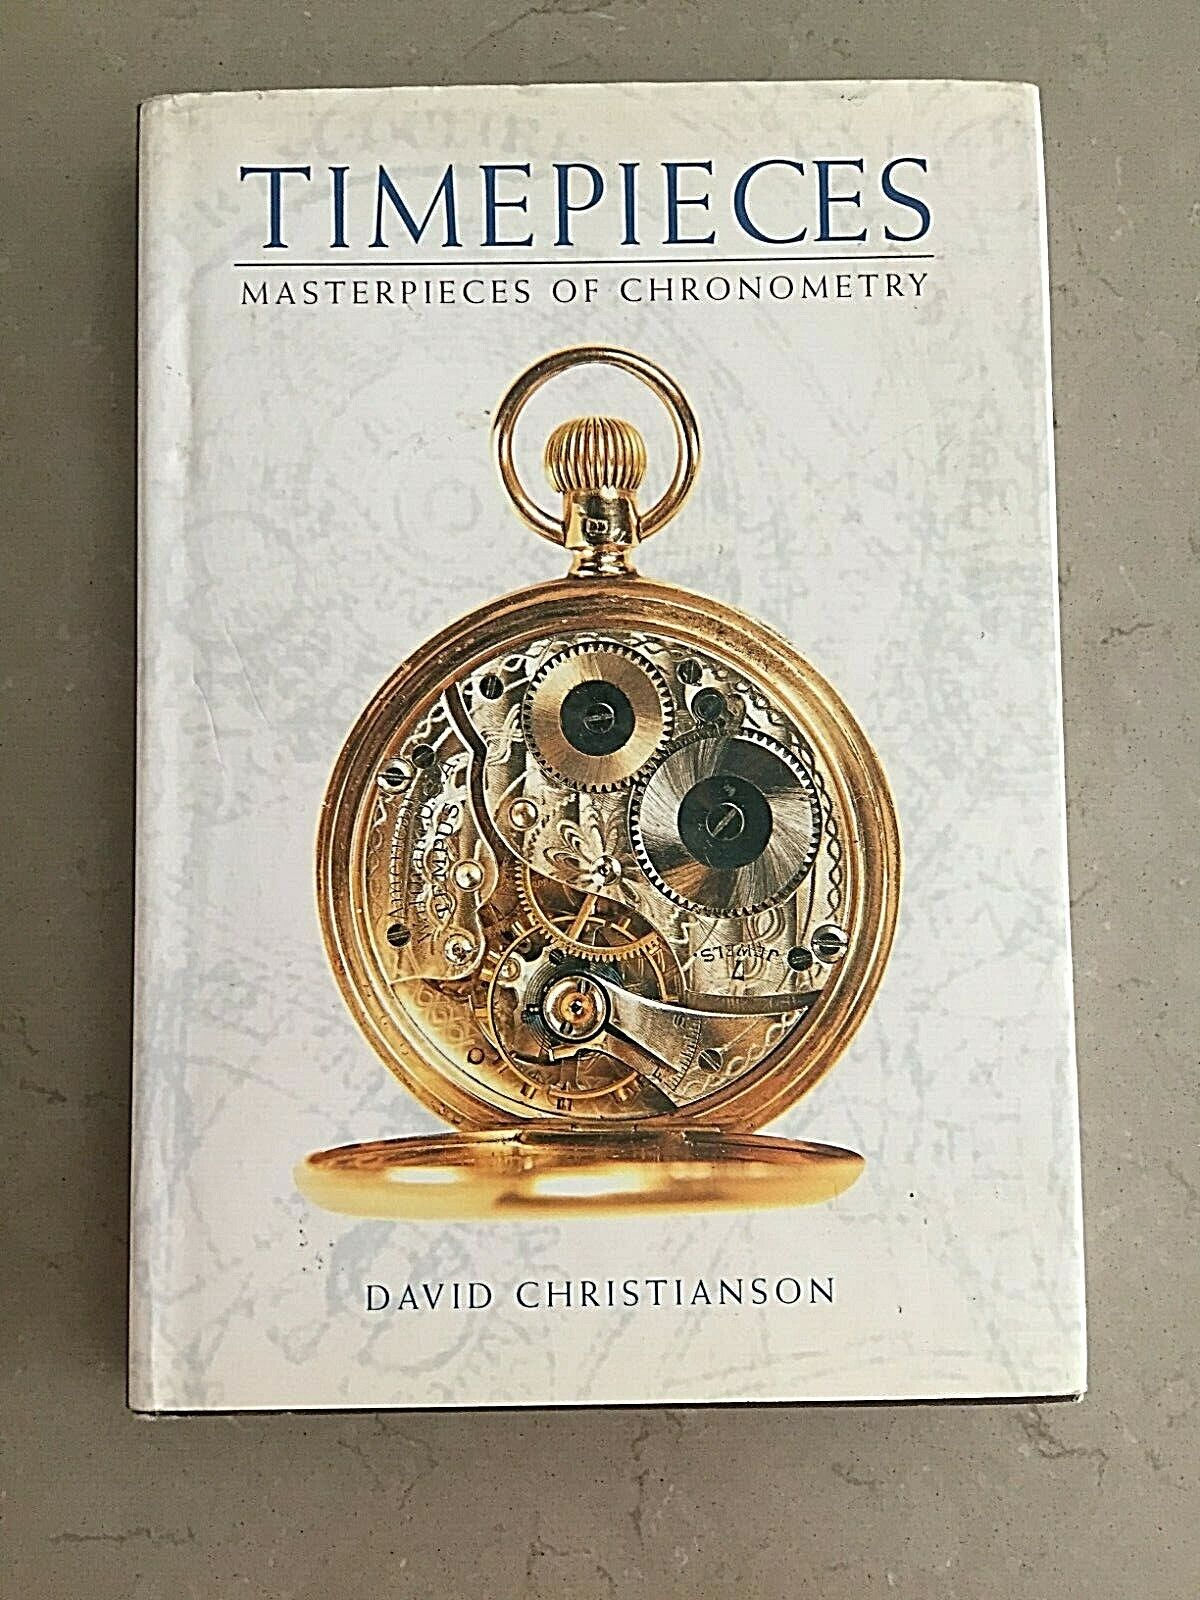 Timepieces : Masterpieces of Chronometry by David Christianson (2002, Hardcover)